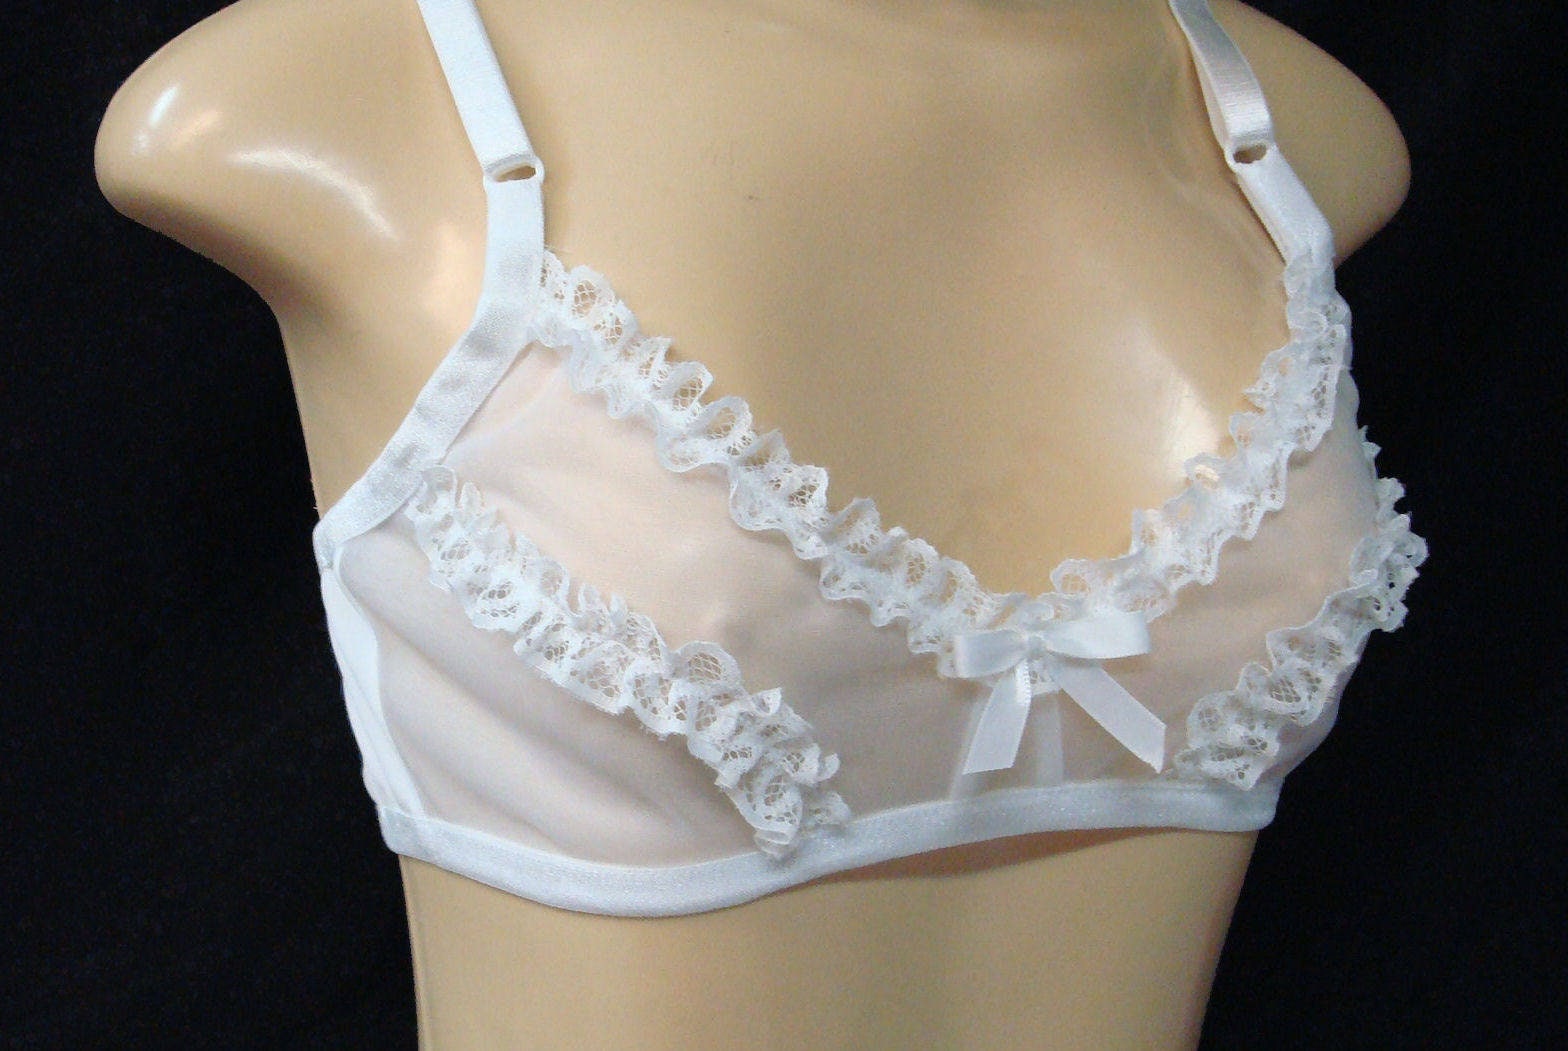 White Sheer Nylon Chiffon BRA With Lace Available in All COLORS